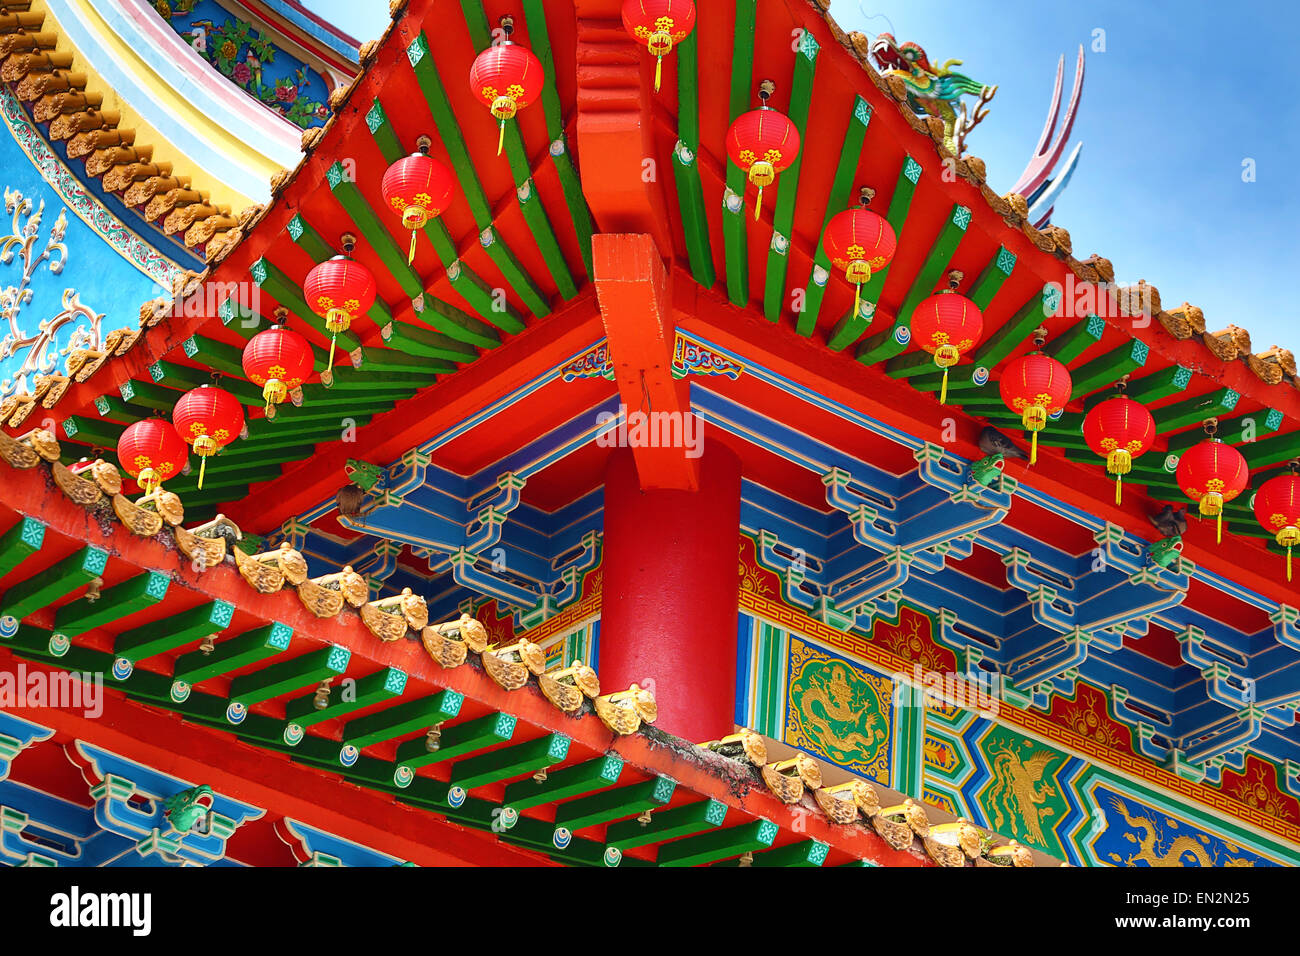 Red lanterns and roof decorations on the Thean Hou Chinese Temple, Kuala Lumpur, Malaysia Stock Photo